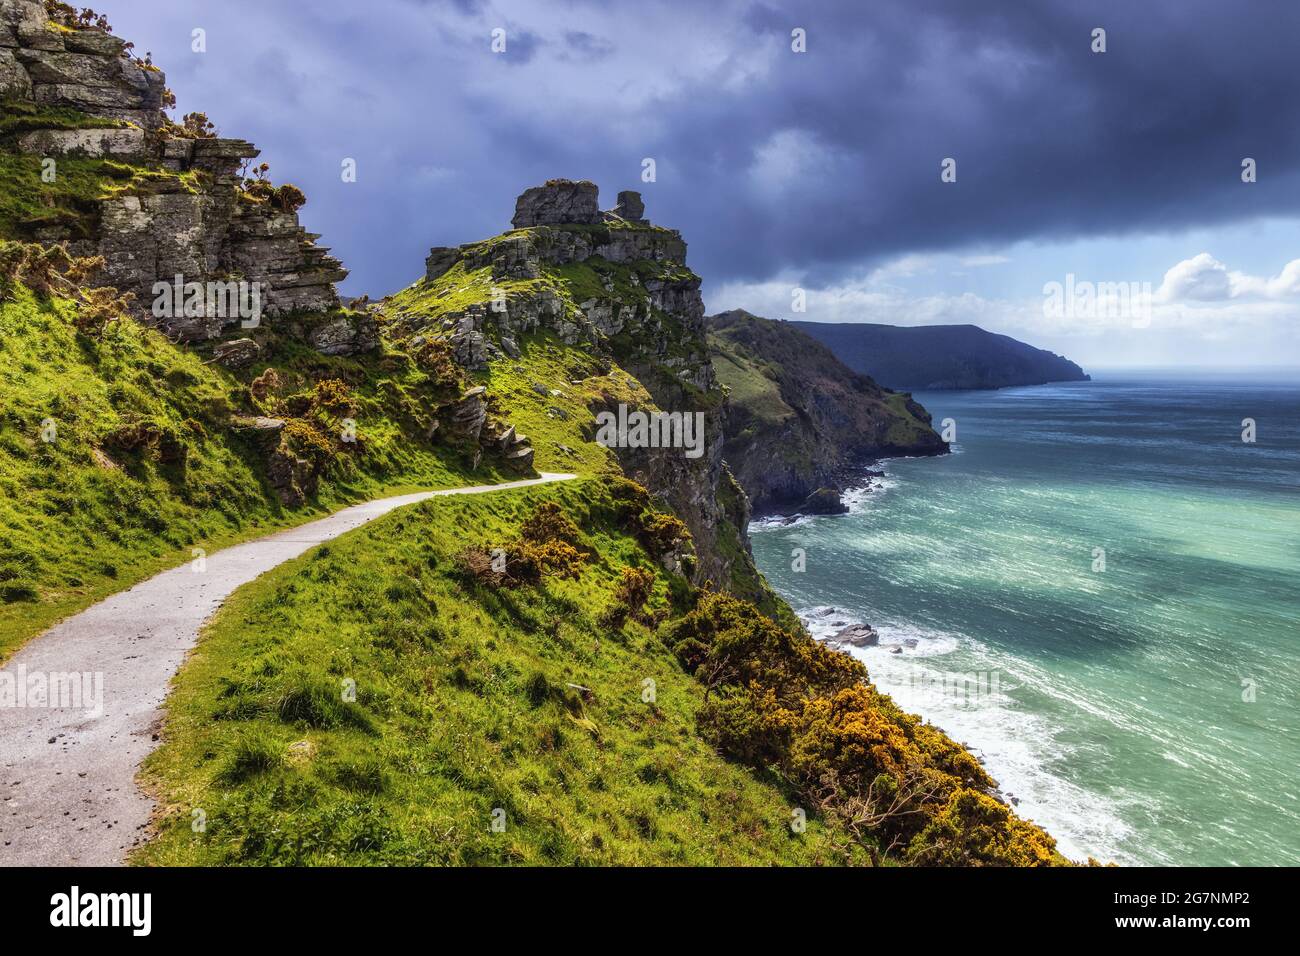 Wringcliff Bay near Castle Rock, Valley of the Rocks in the Exmoor National Park, from the South West Coast Path with heavy rainclouds approaching. Stock Photo